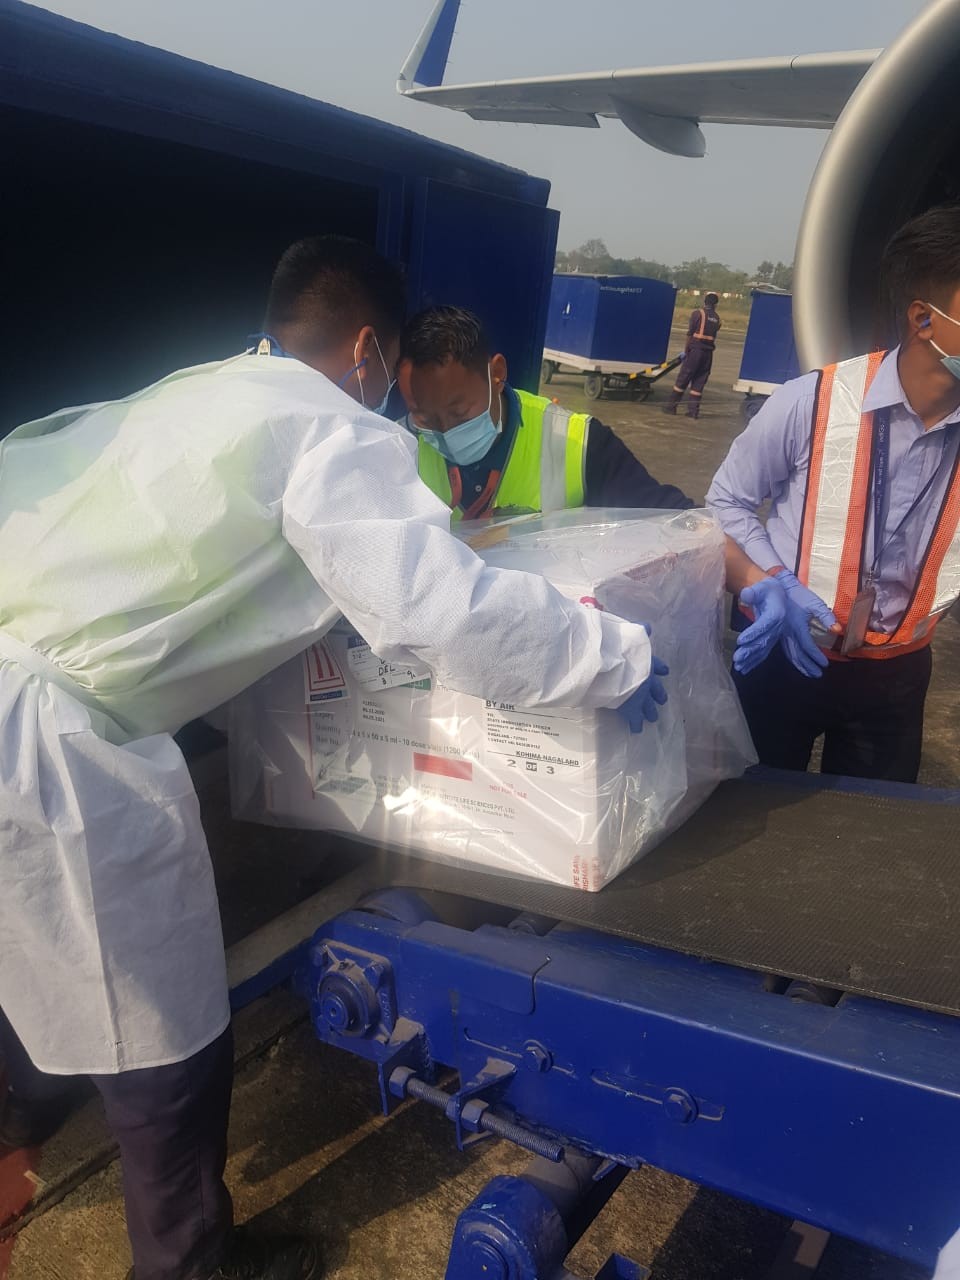 Consignments of the Covishied vaccine which arrived in Nagaland on January 14. (DIPR Photo)